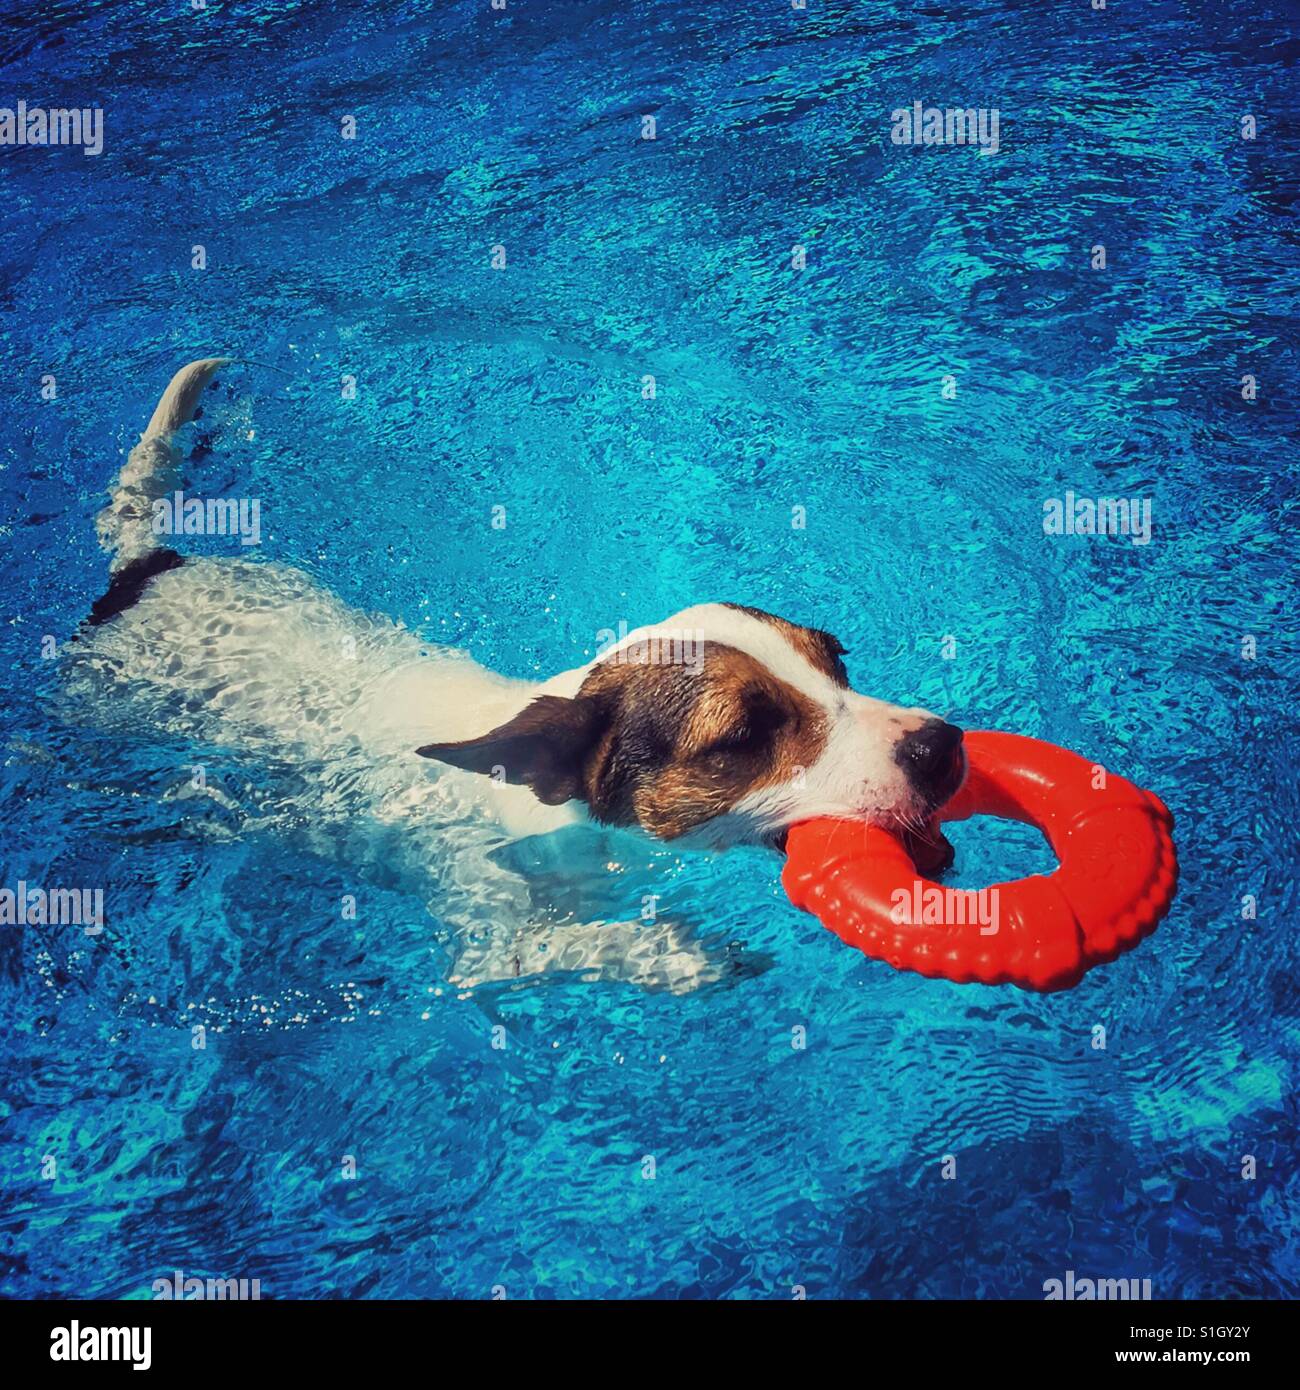 Jack Russell Terrier dog swimming carrying a toy lifesaver on a sunny day. Square crop. Stock Photo